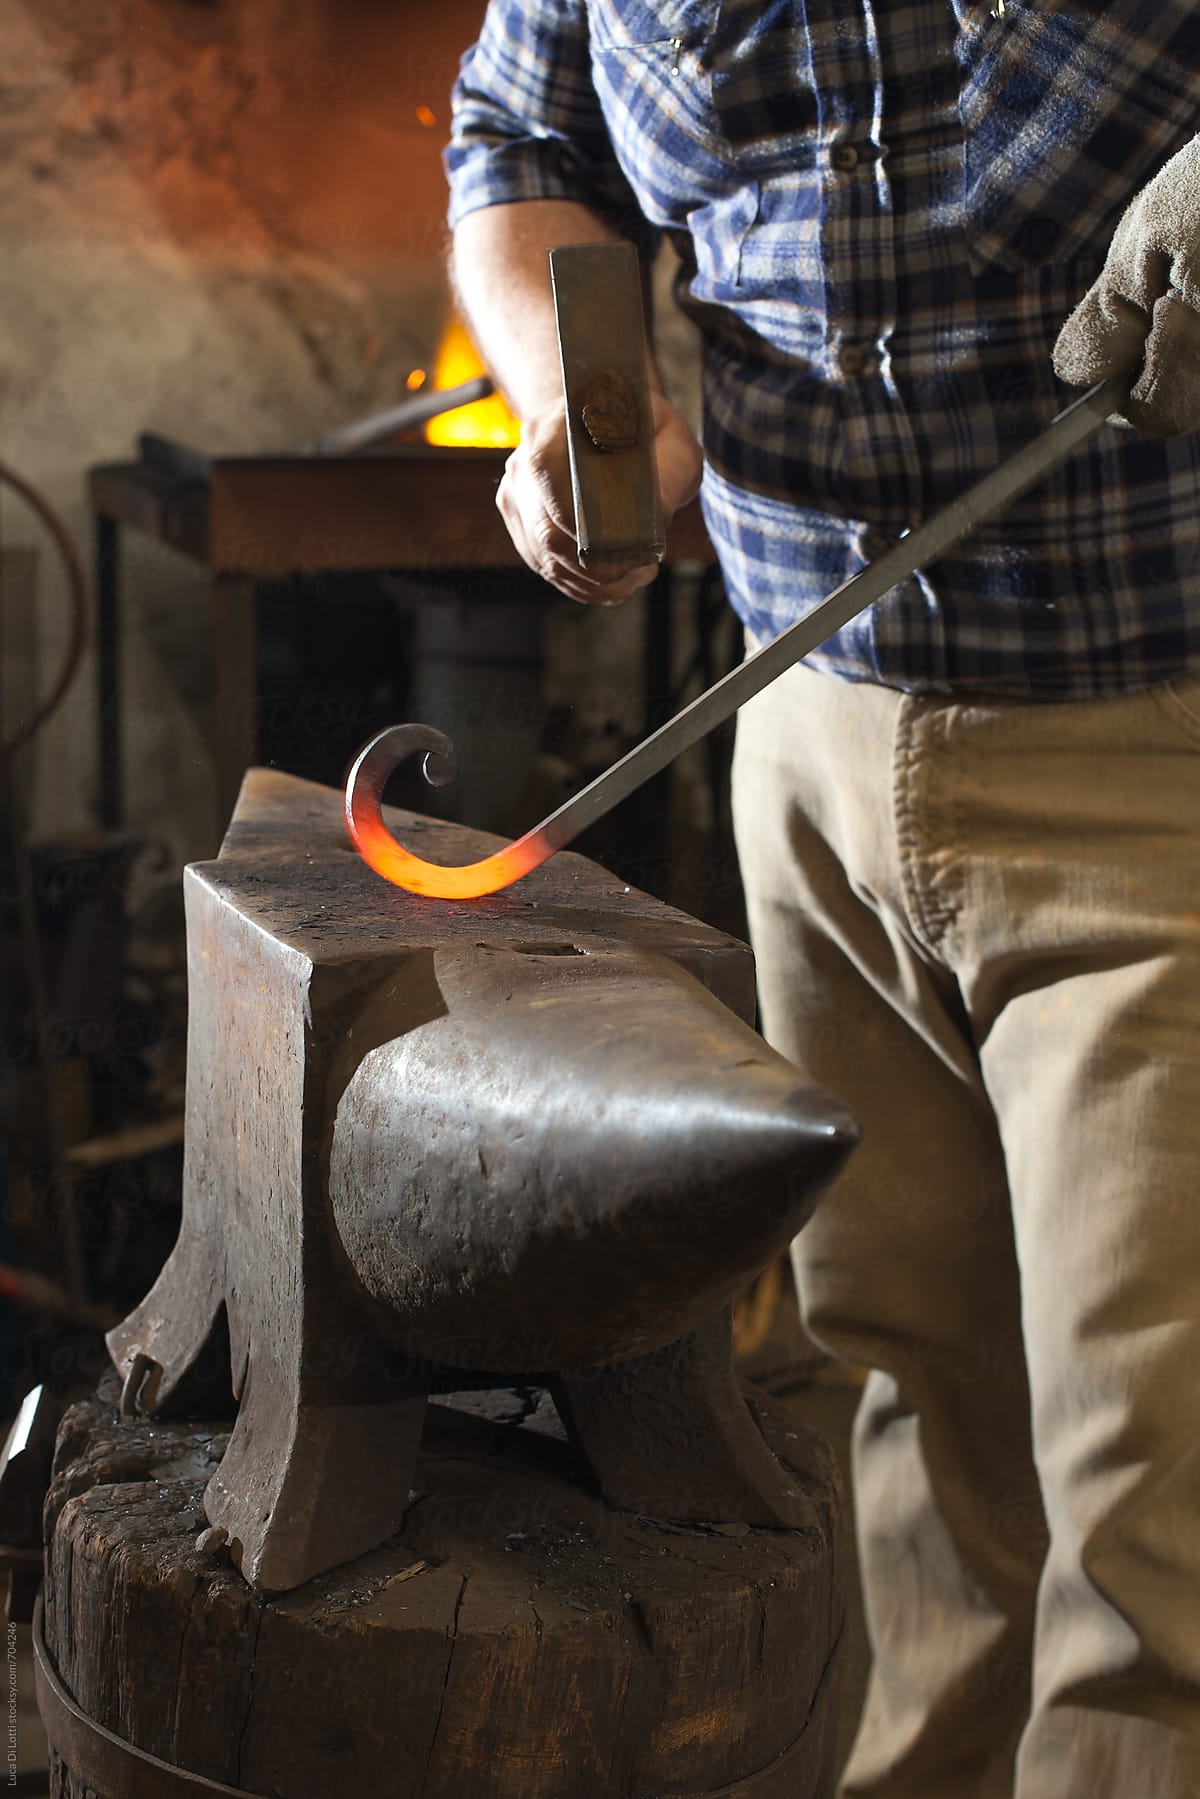 Blacksmith shaping a red-hot iron rod